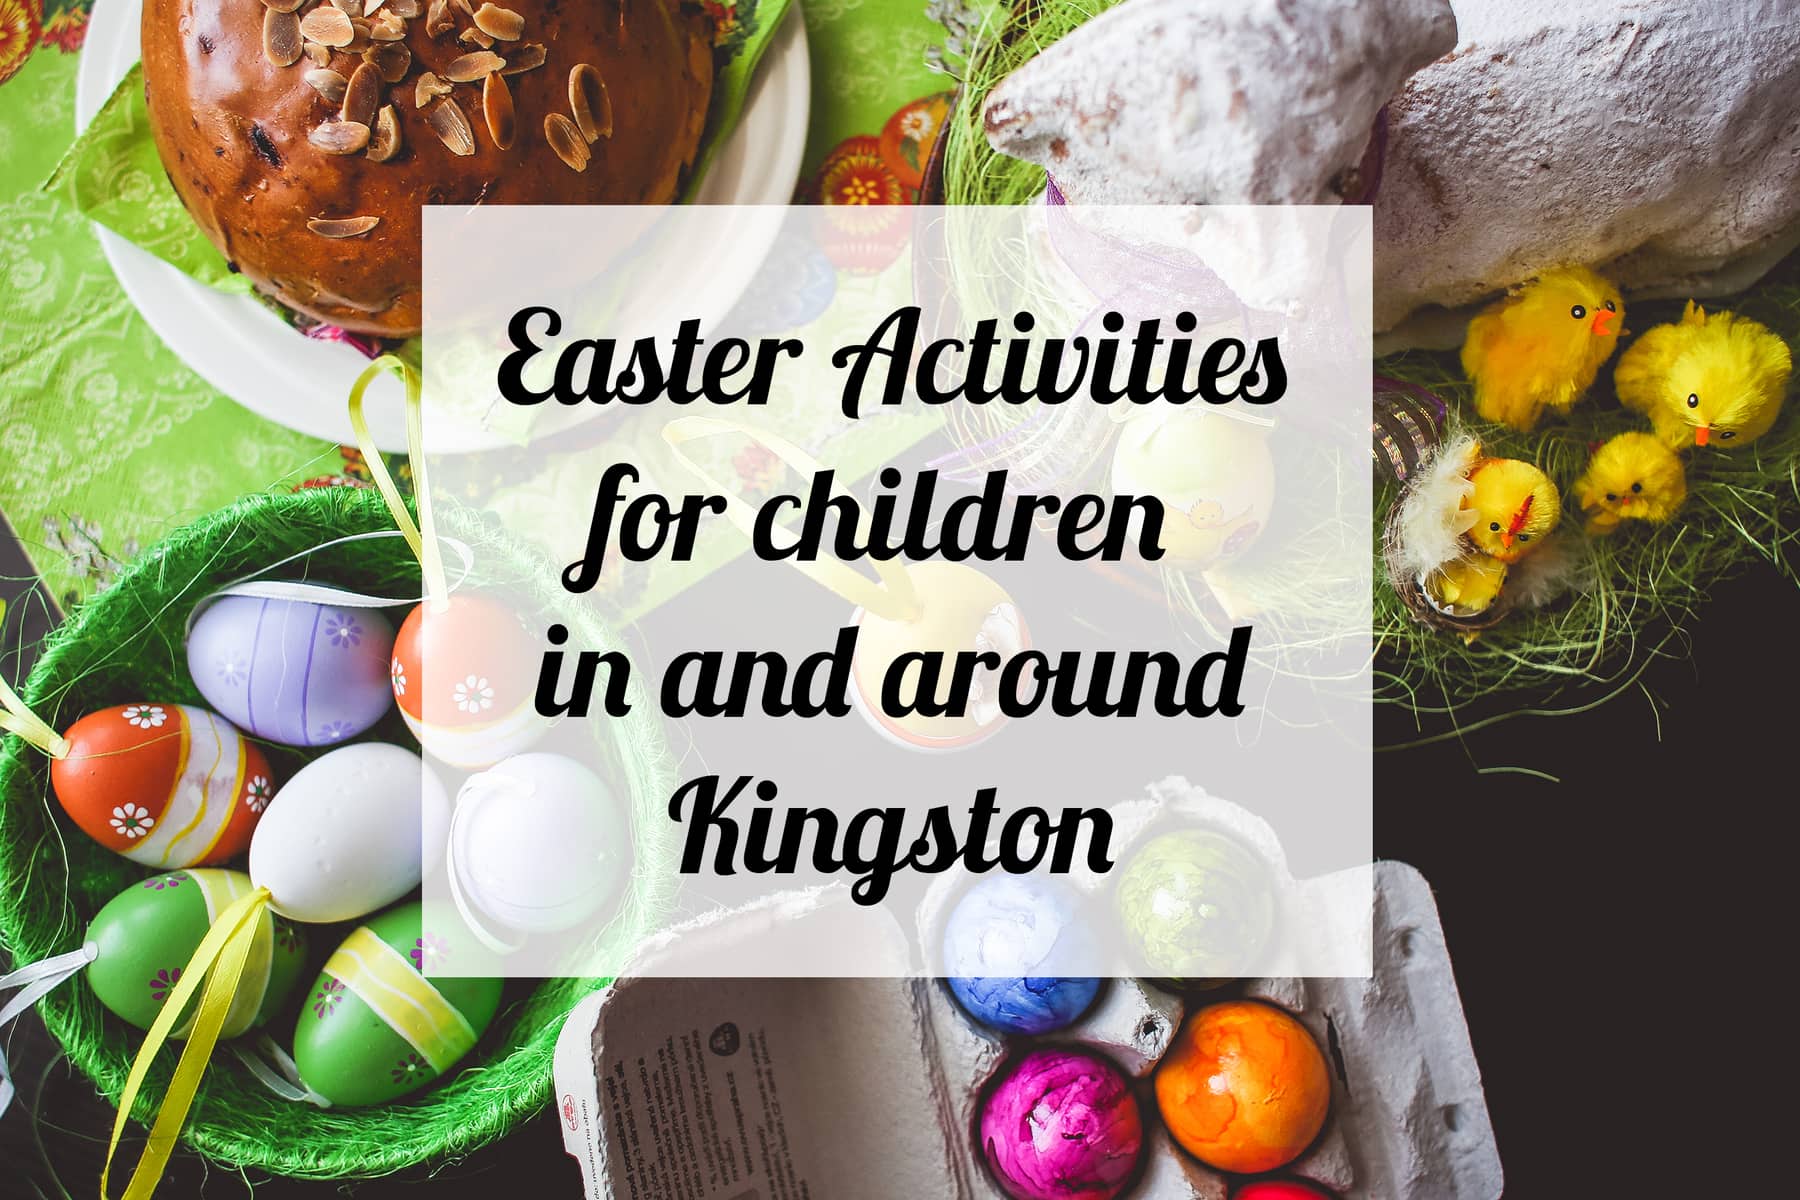 Easter Activities for children in and around Kingston